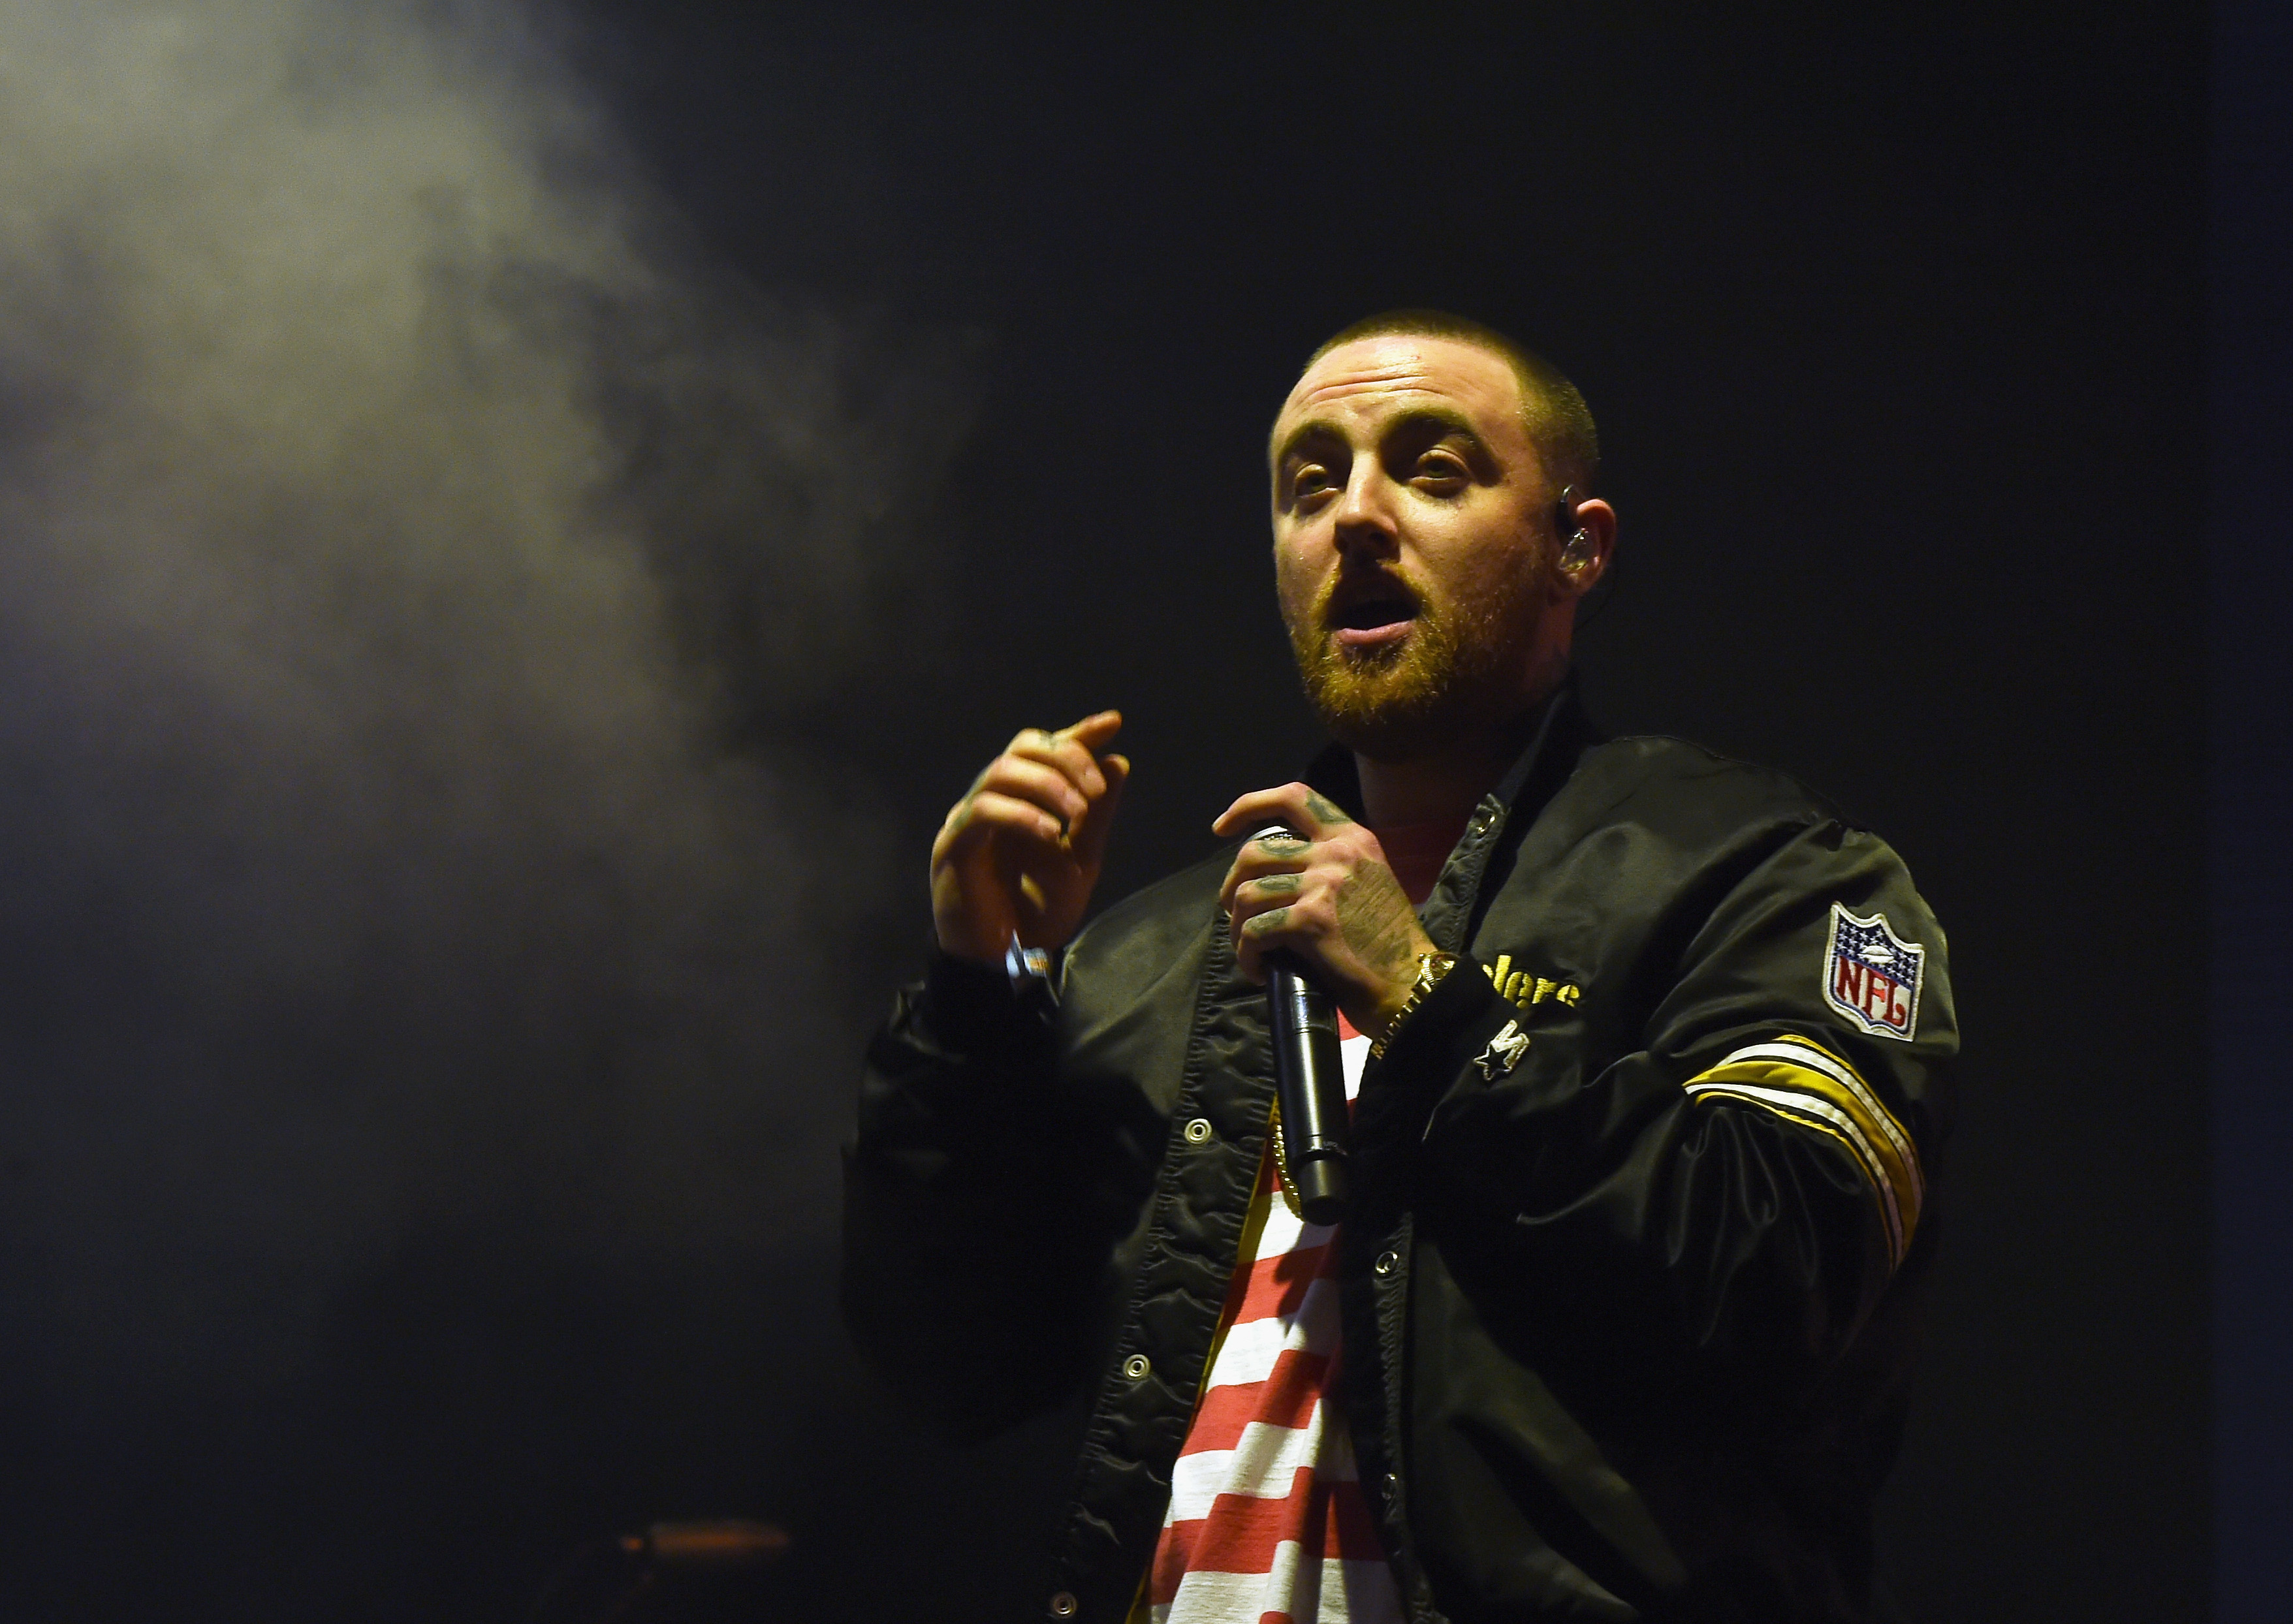 Mac Miller arrested for DUI, Hit and Run